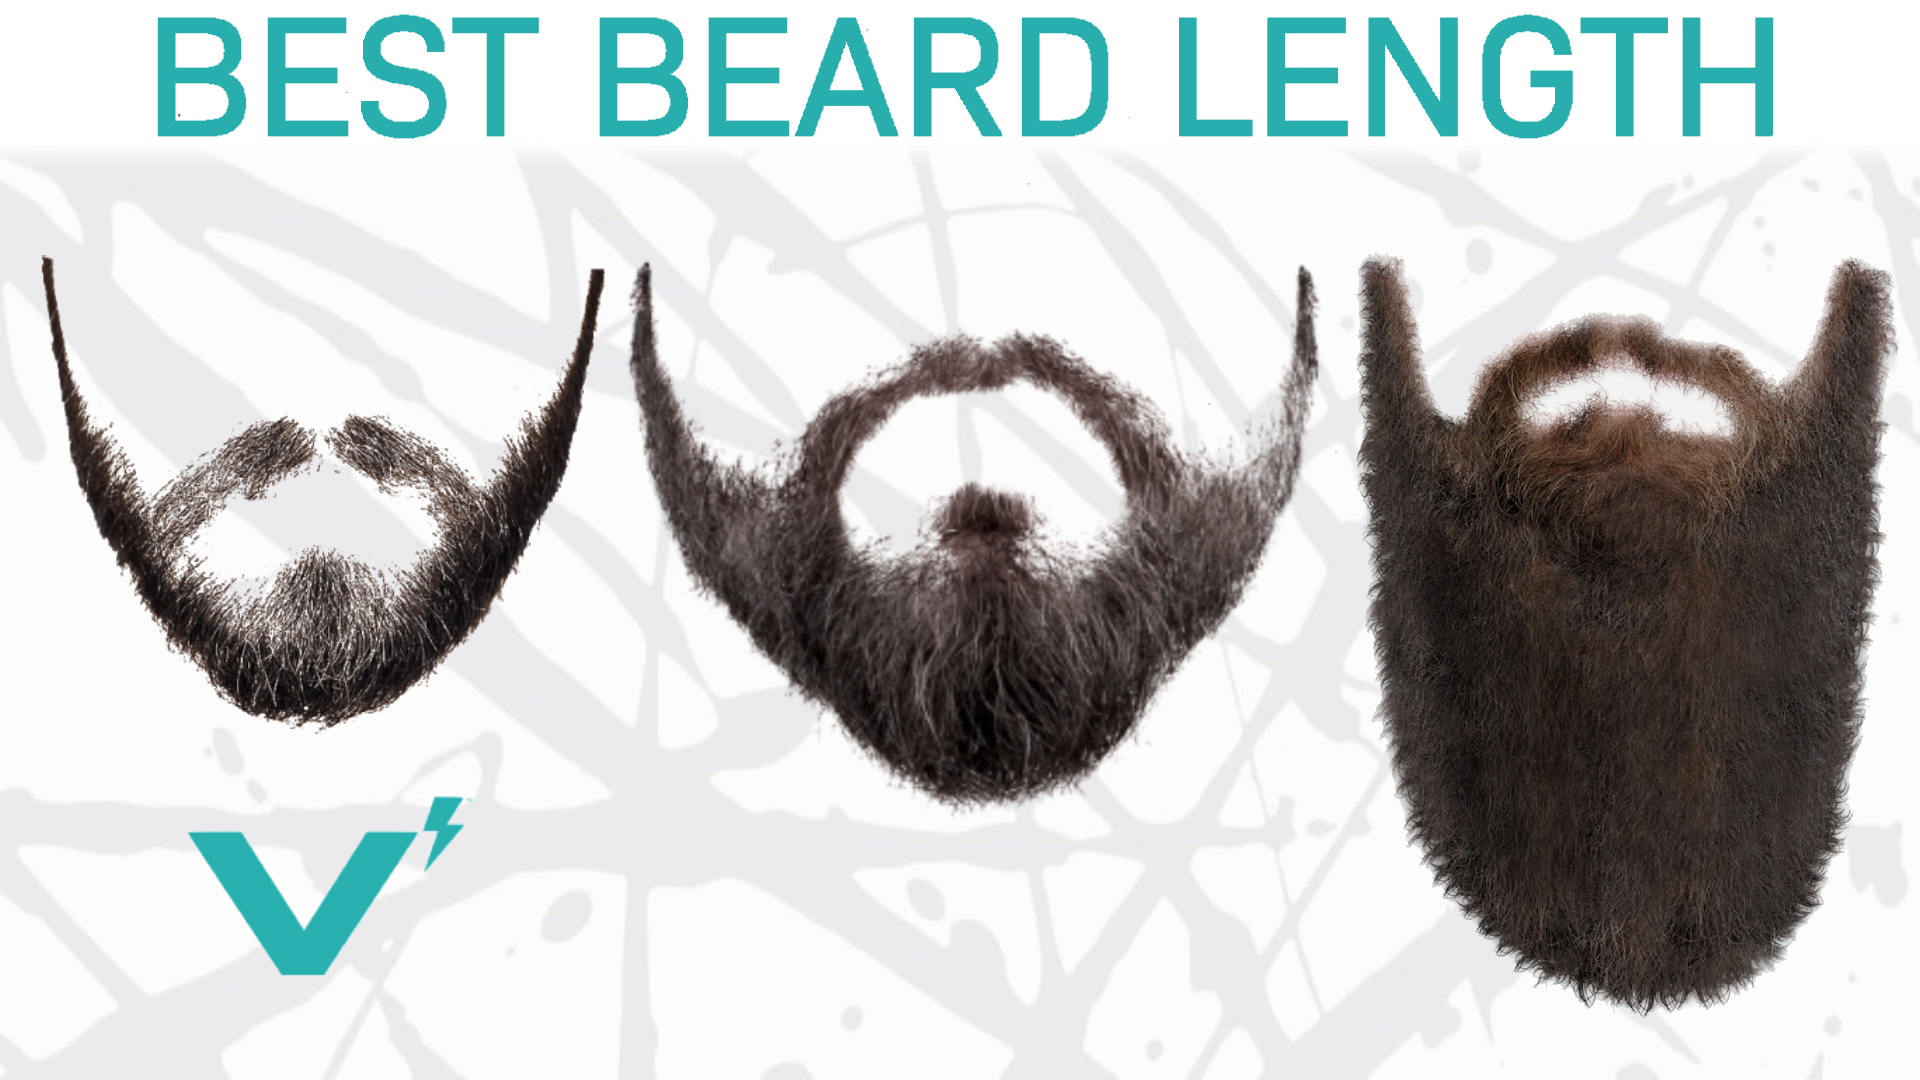 What Are The Different Beard Lengths Called?